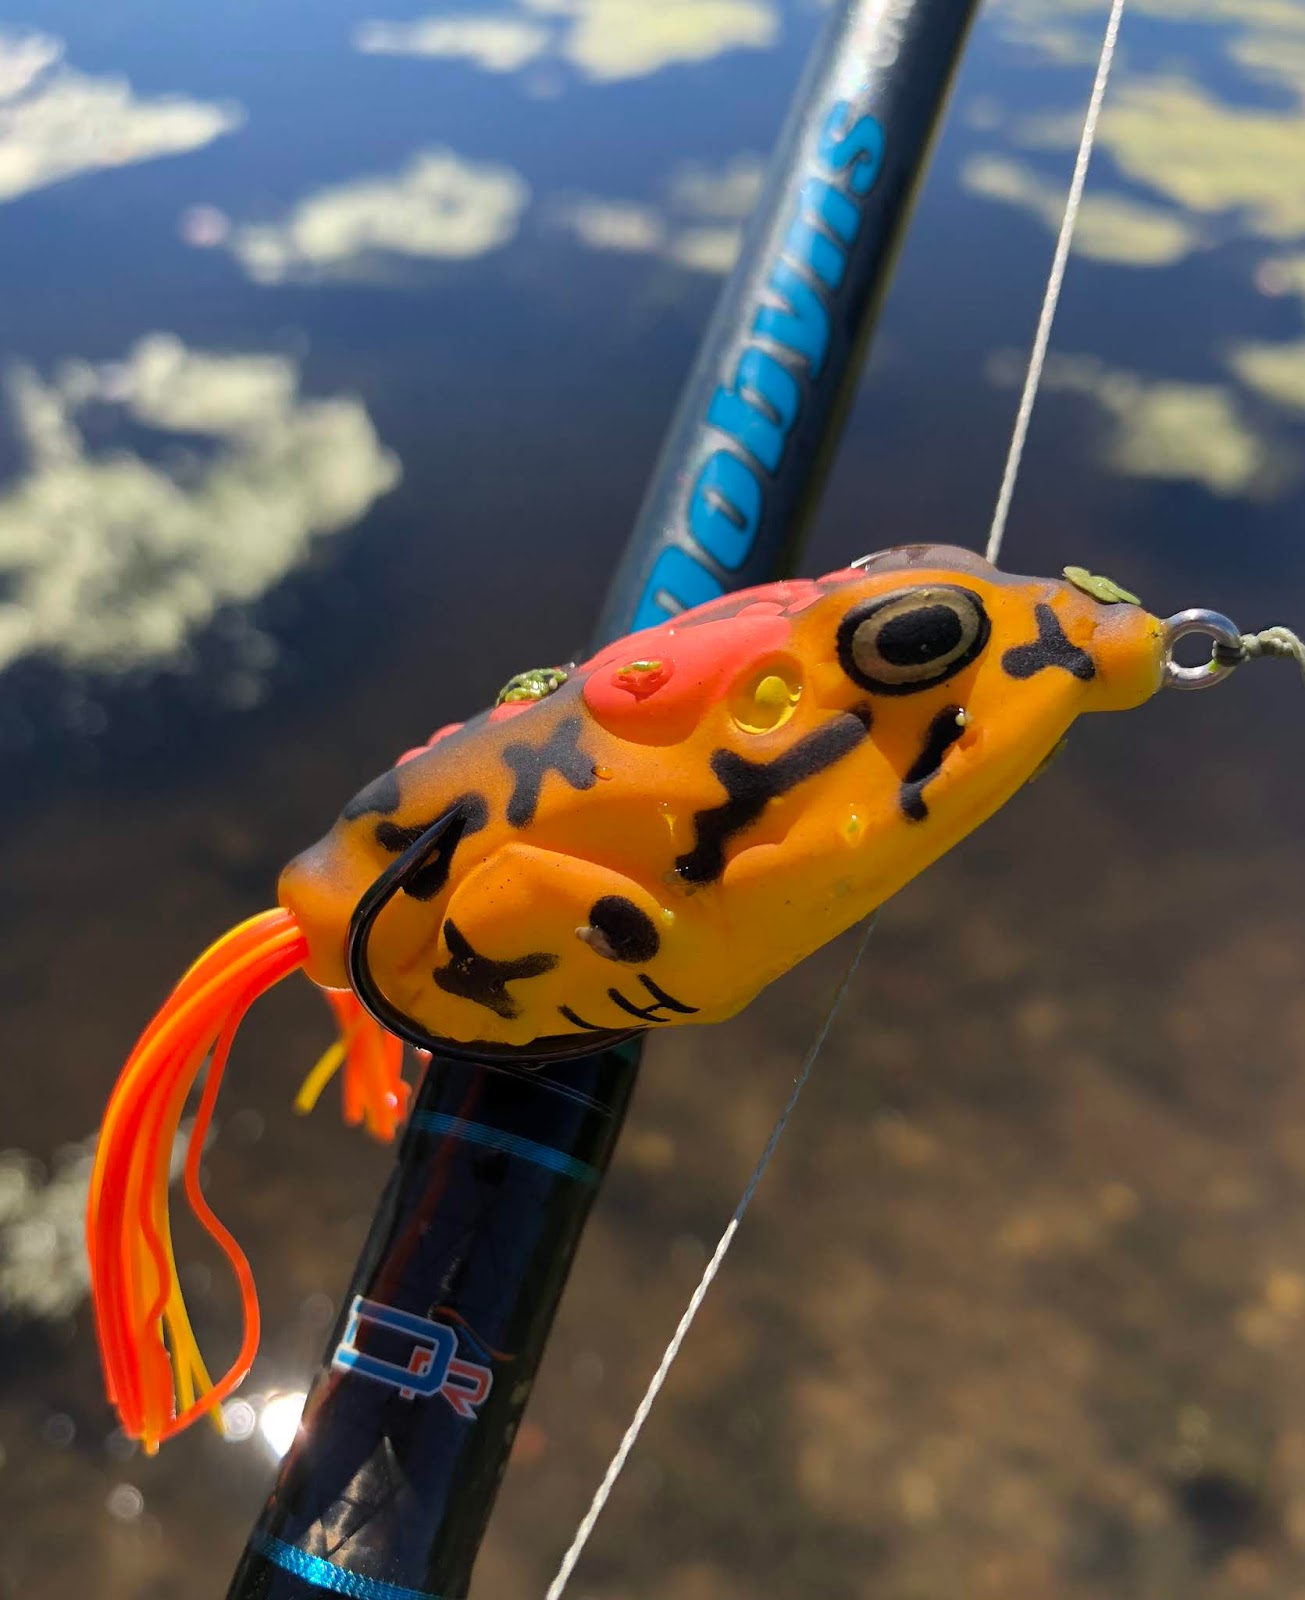 Bass Junkies Frog Pond: LunkerHunt Compact Frog Review